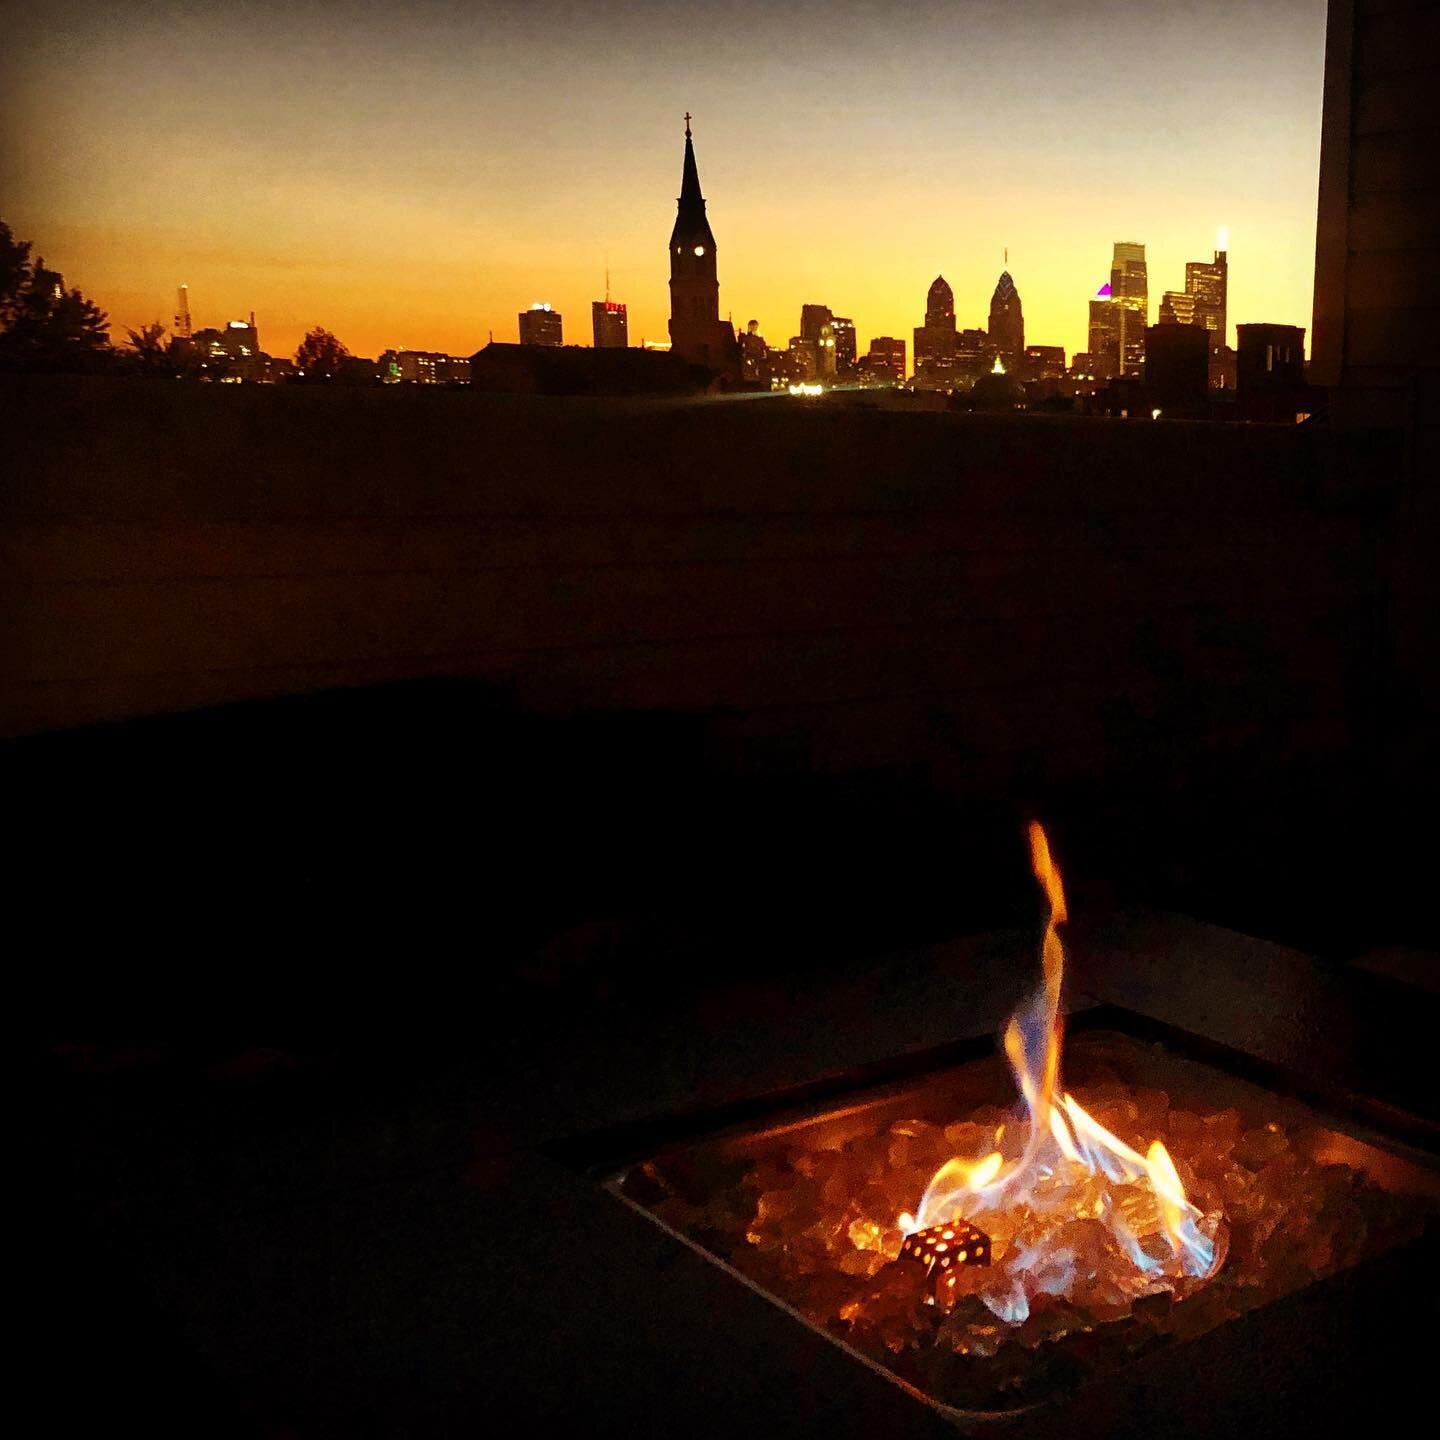 Hoping for s&rsquo;more of this amazing weather... 
.
.
.
.
.
#firepitseason #citylife #cityview #roofdeckliving